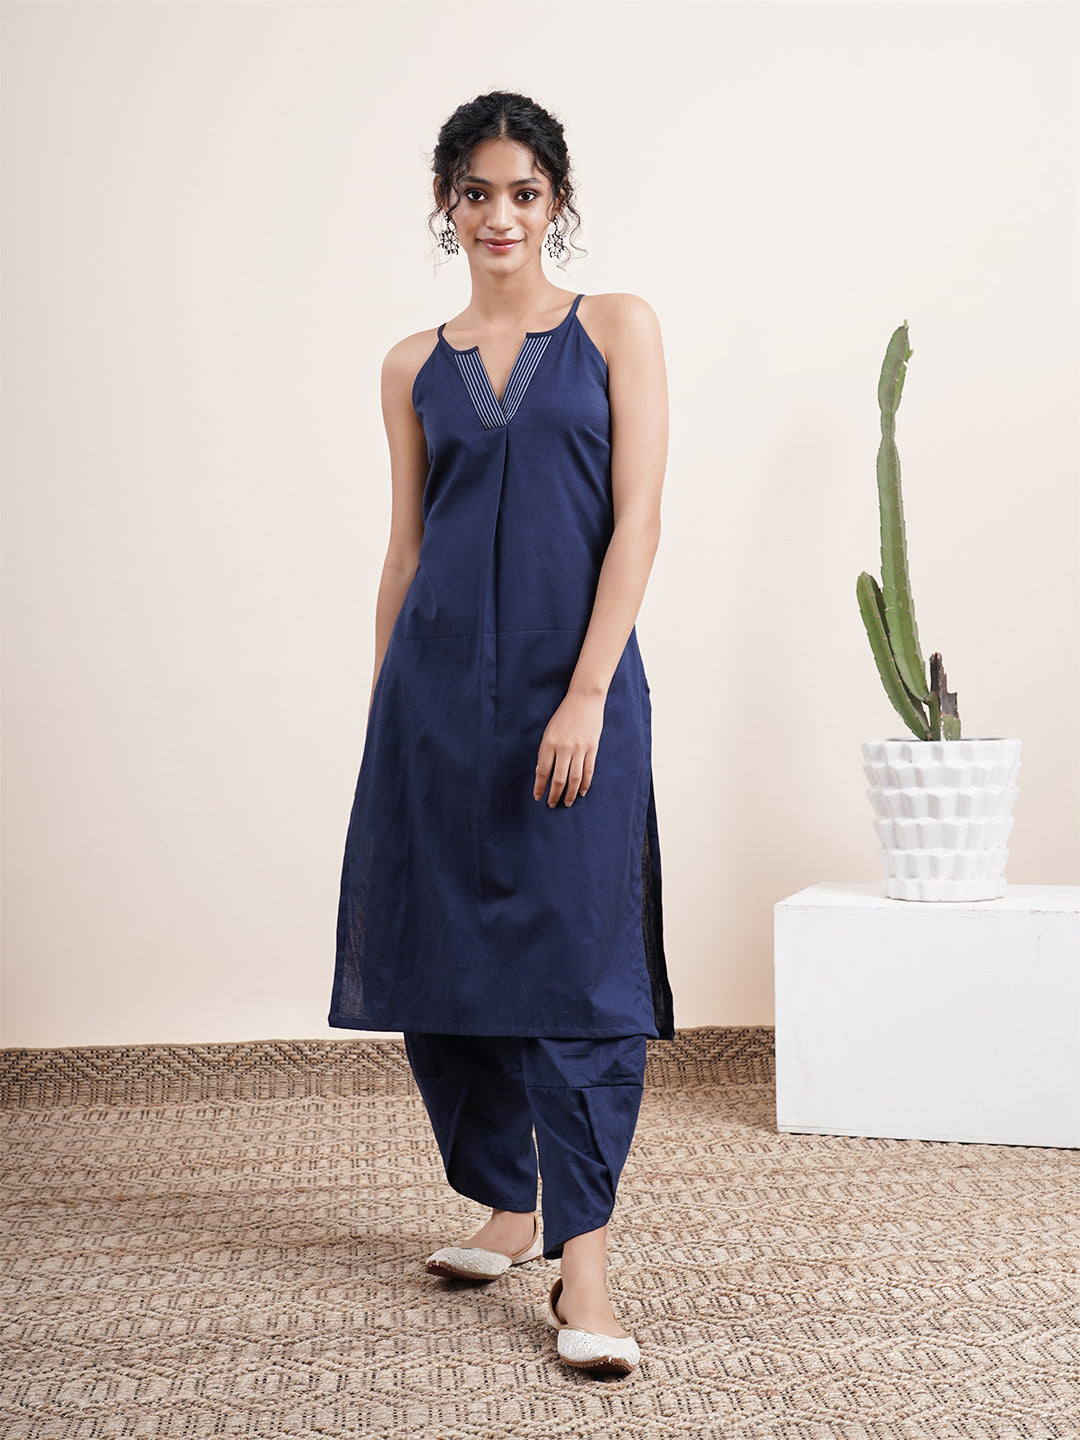 Navy Blue Strappy kurta with contrast stitches on placket